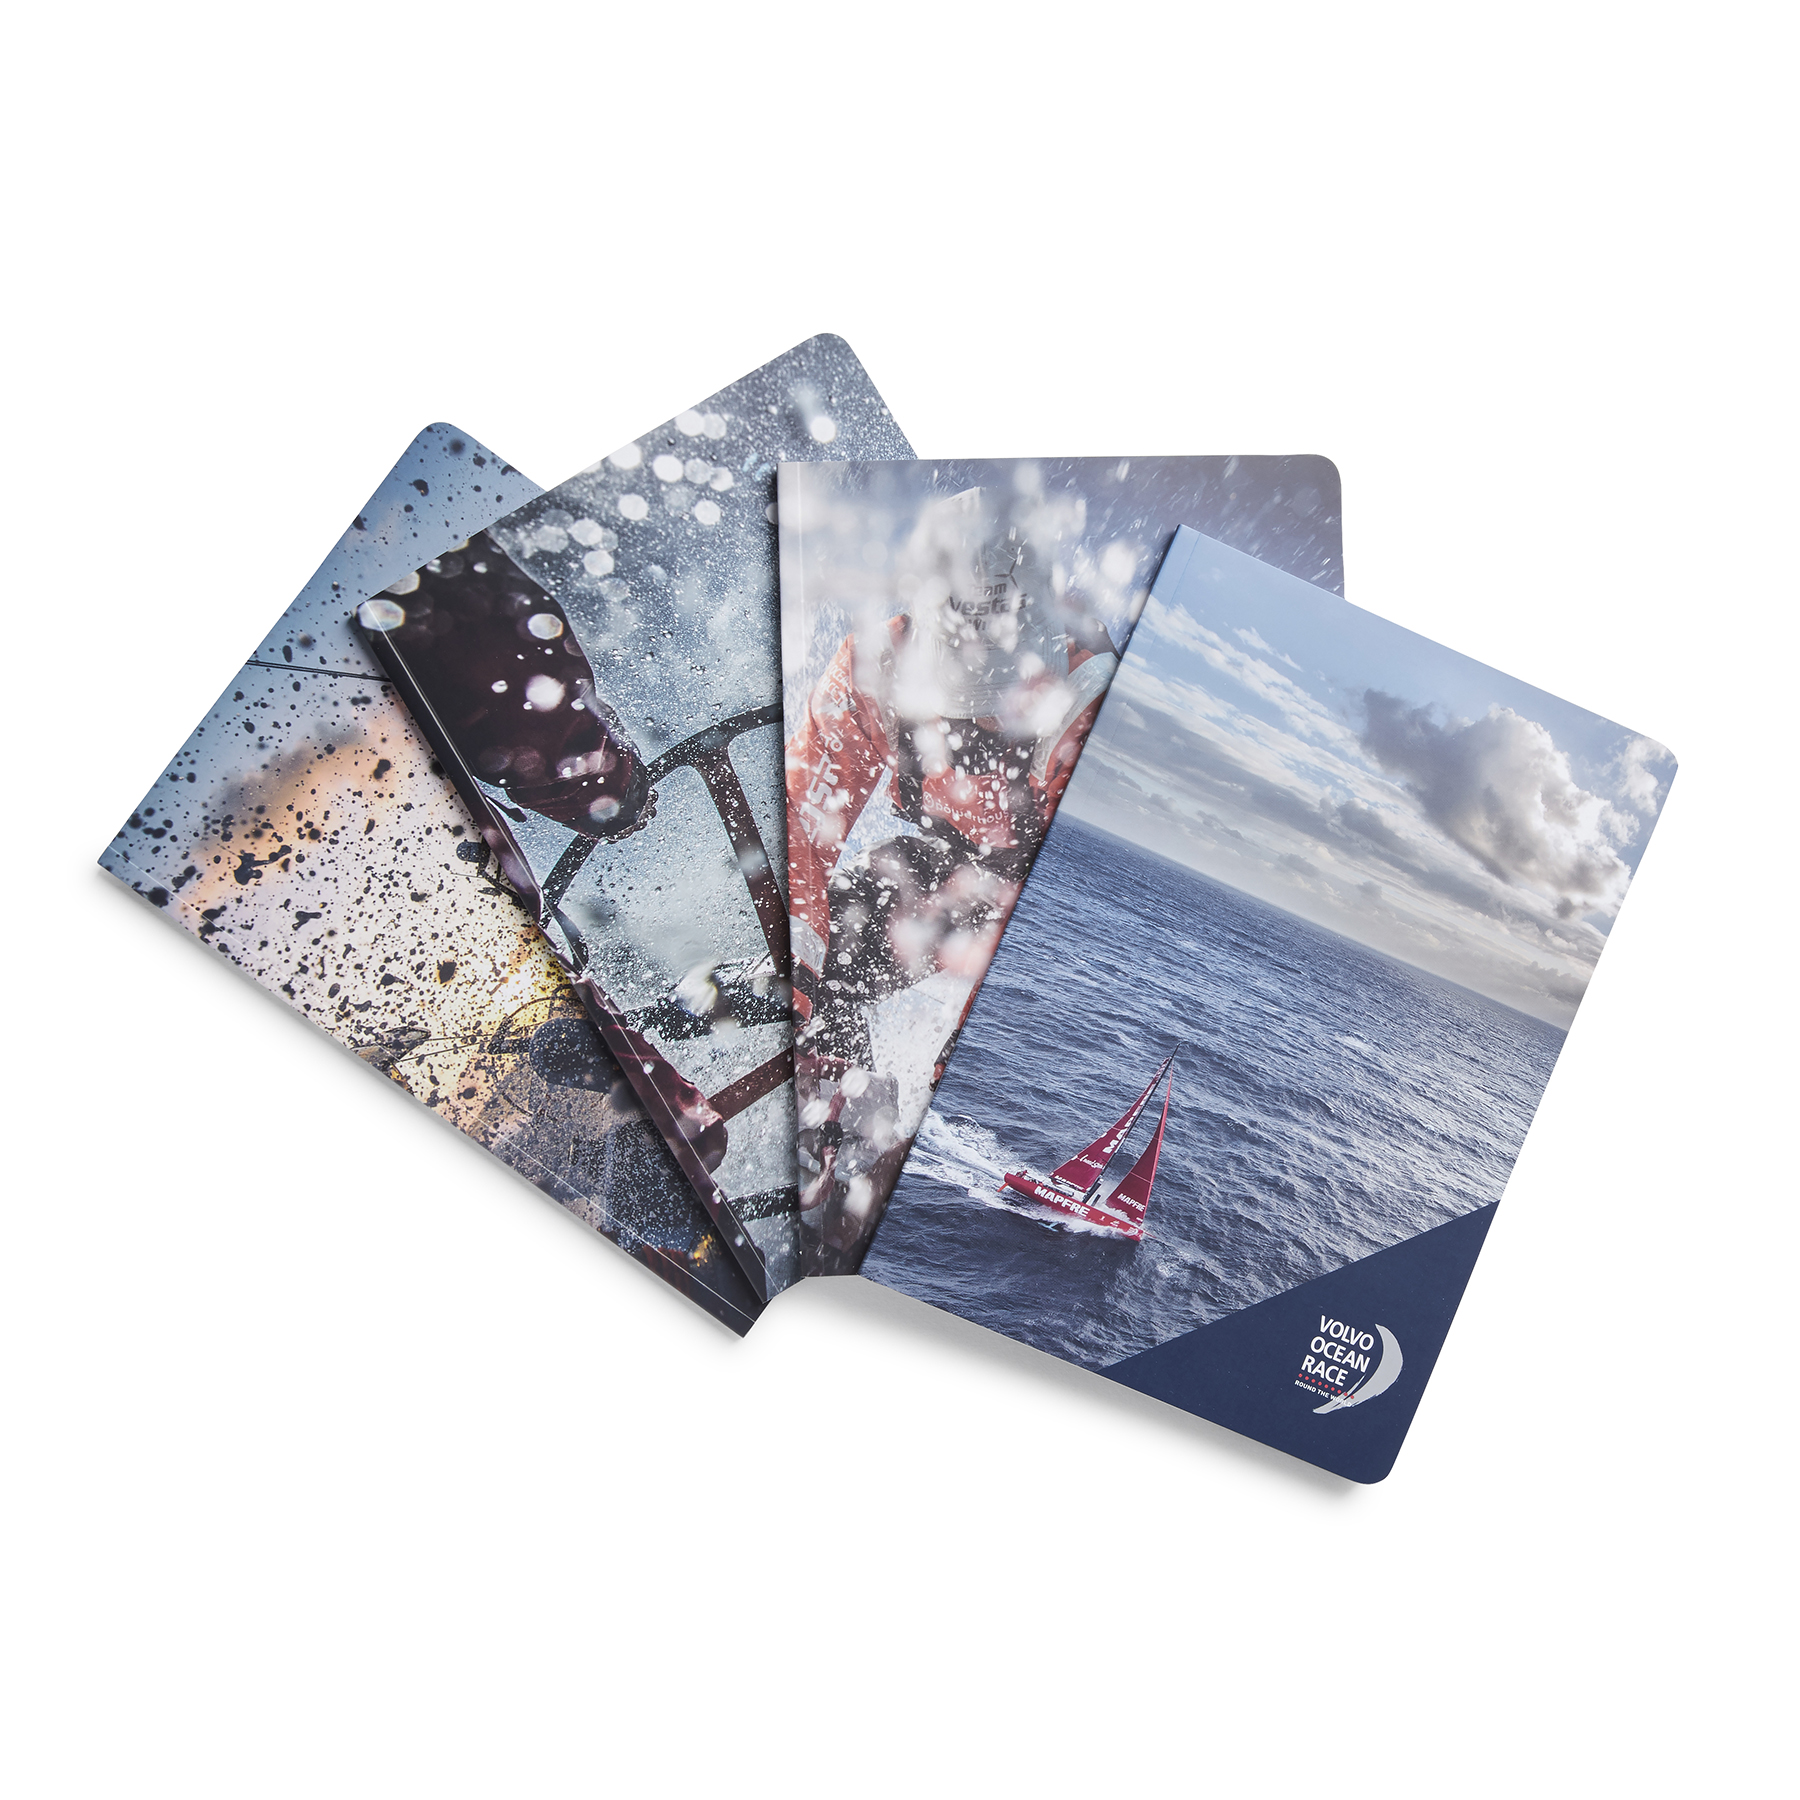 Volvo Car Lifestyle Collection Shop. Volvo Ocean Race Notebook (4-pack